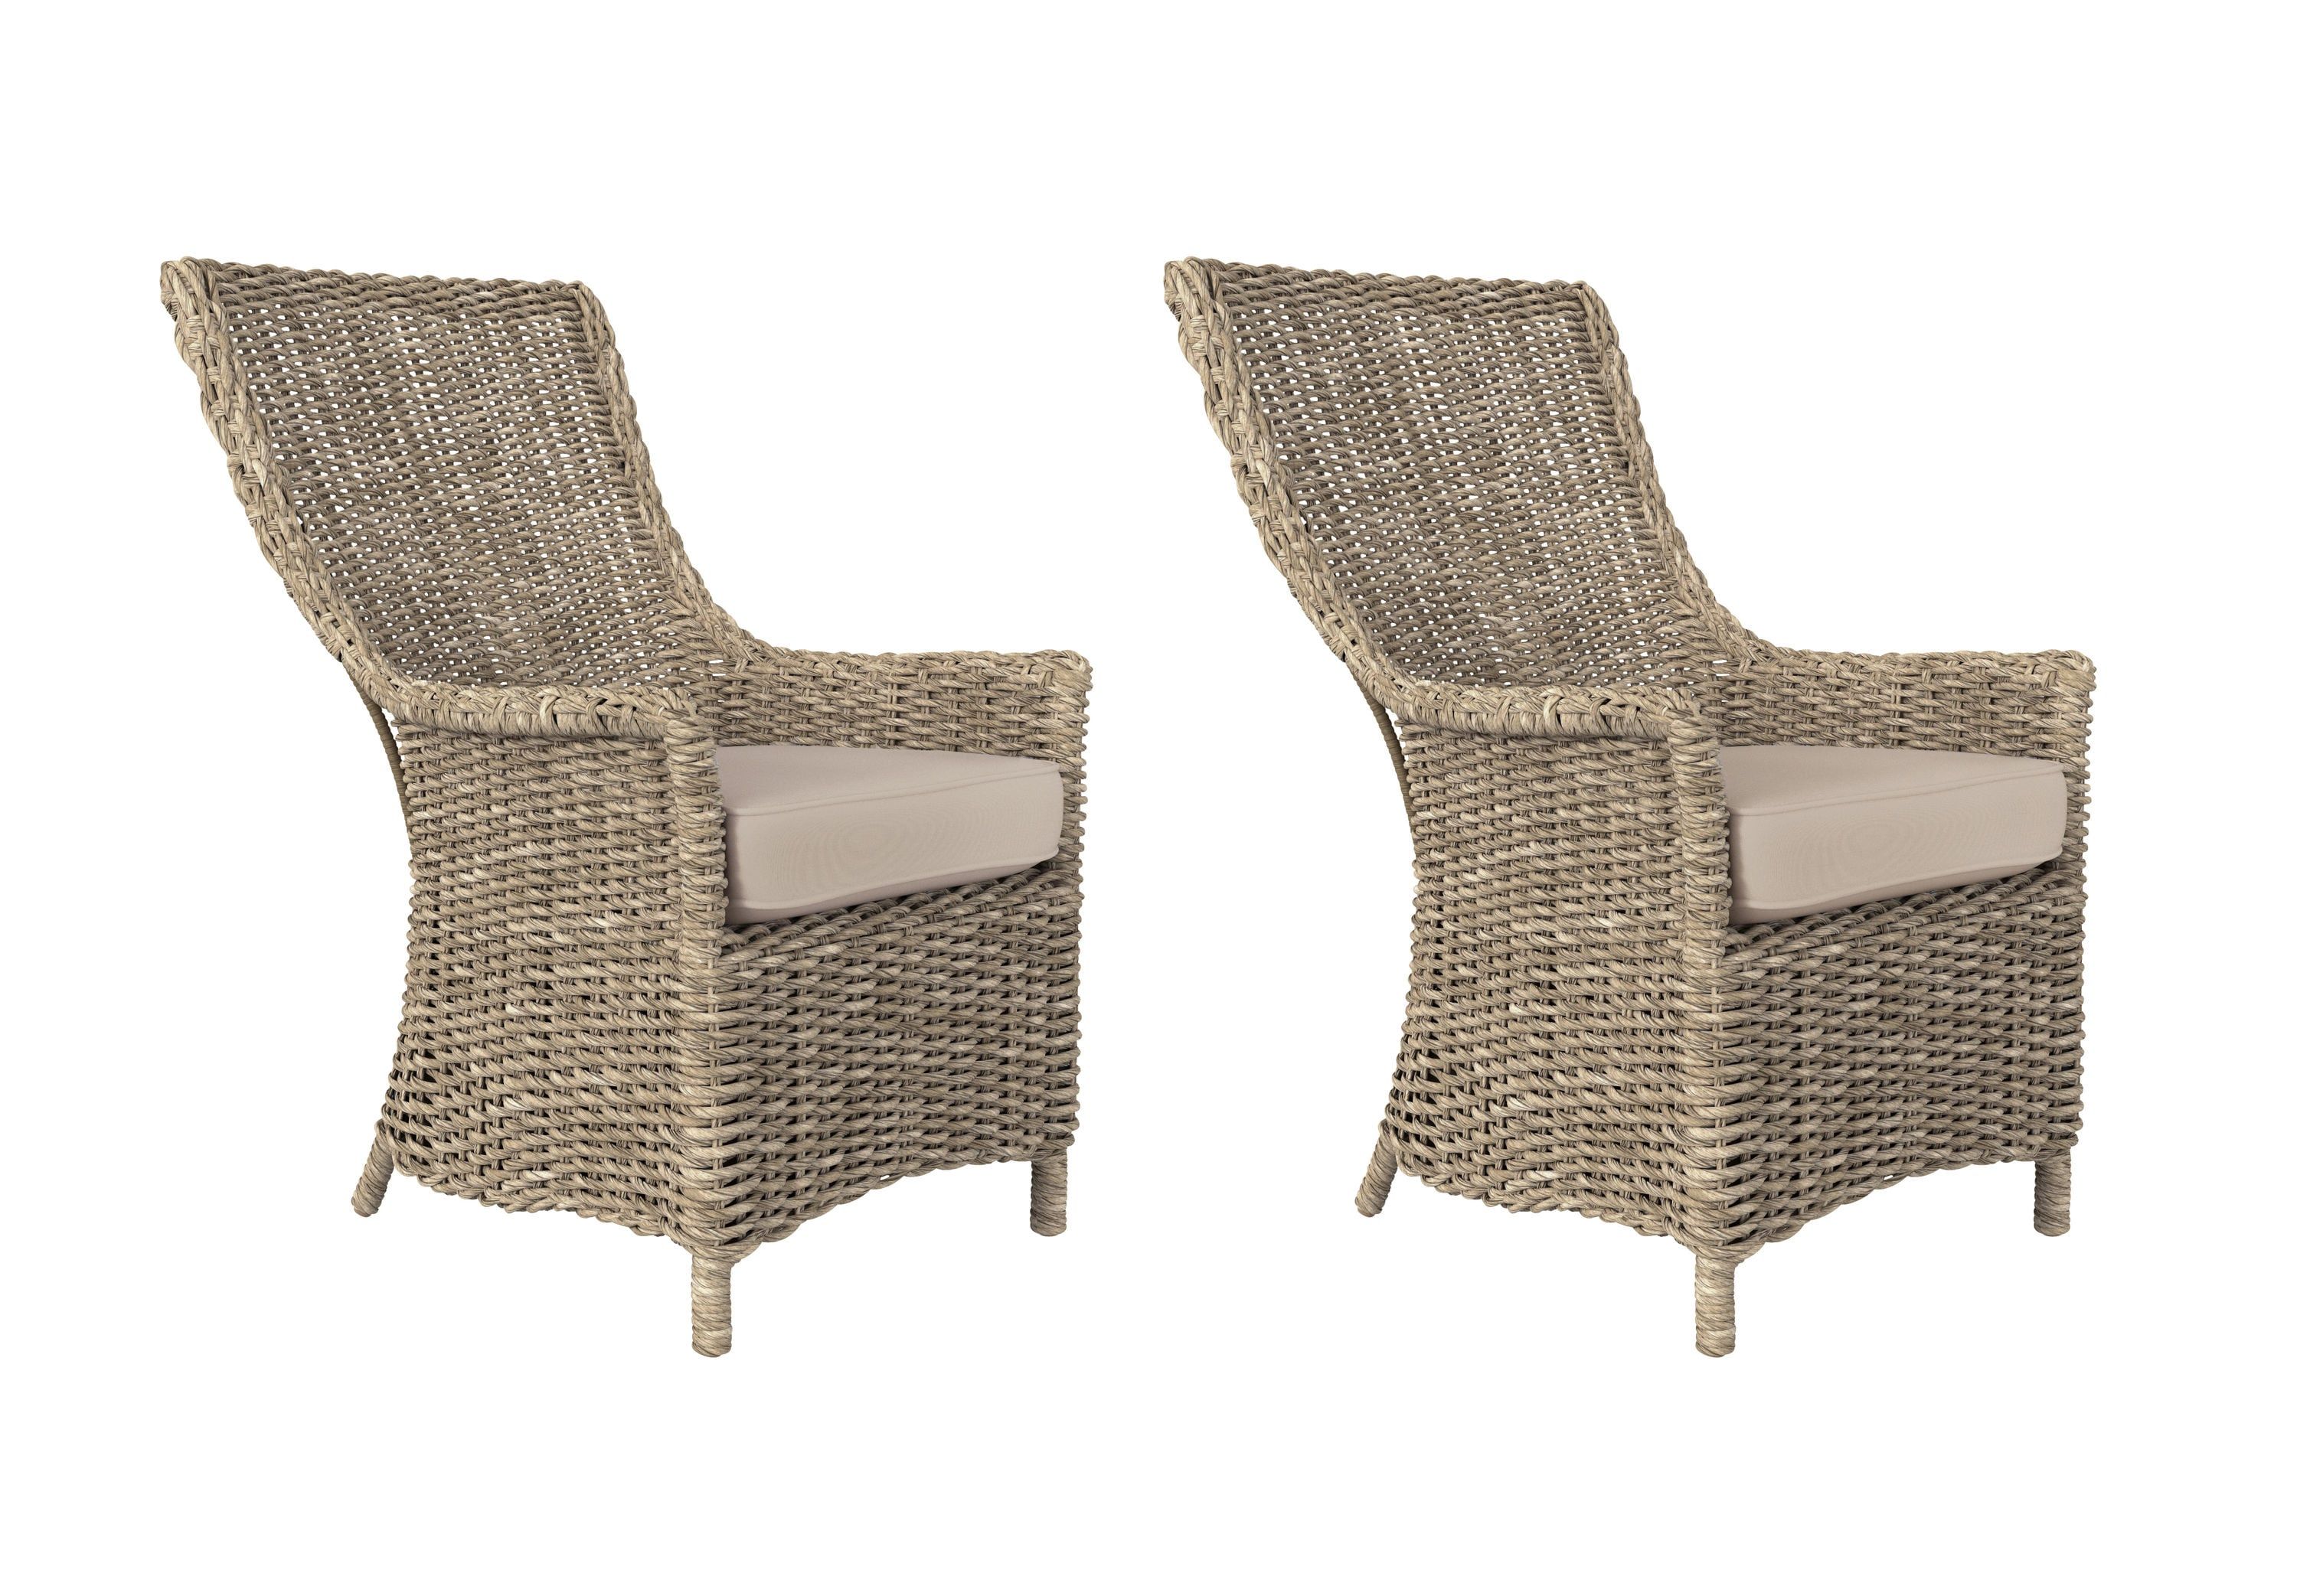 Set of 2 Wicker Light Brown Stationary Chair(s) 